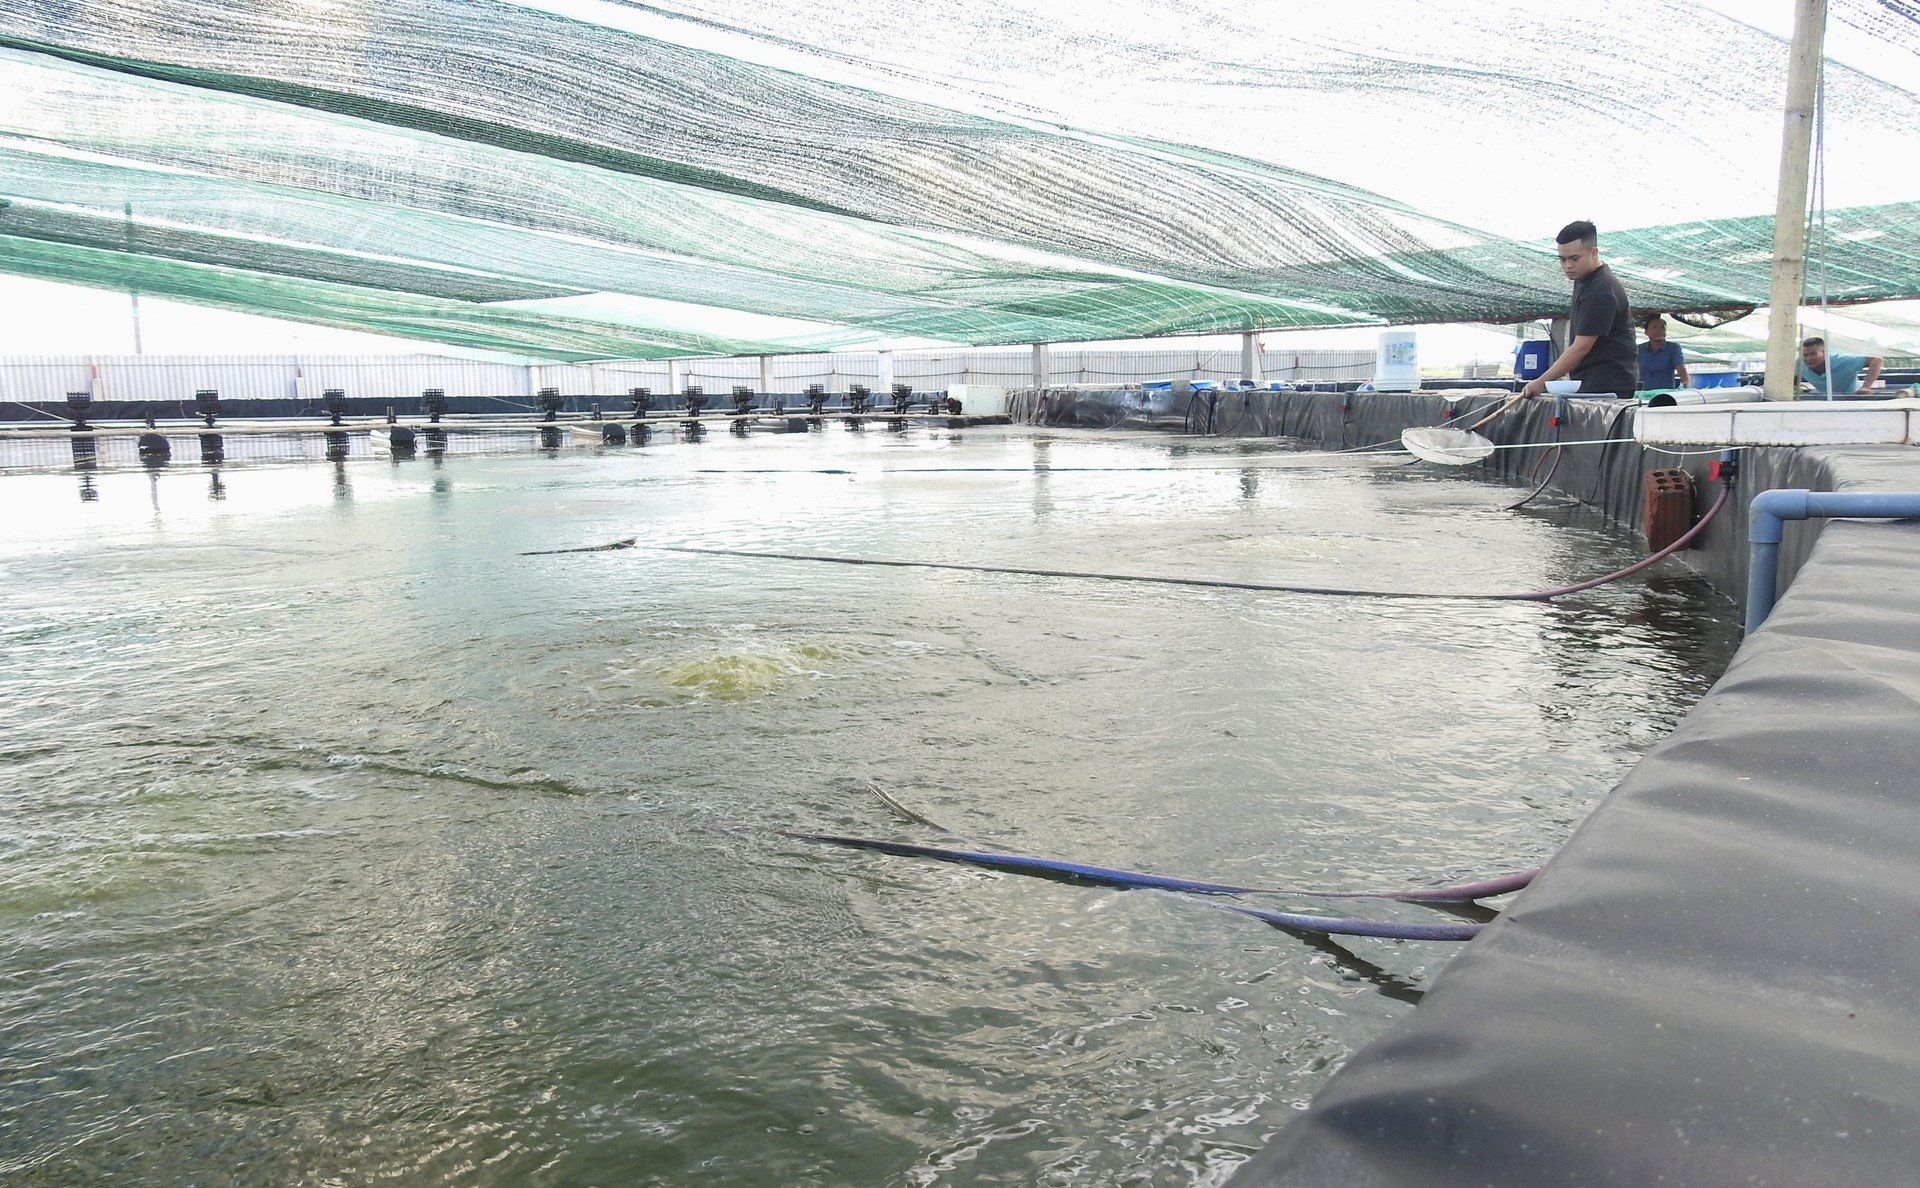 The model of 3-stage shrimp farming with the application of microbiological RAS technology increases the economic value for shrimp farmers in Ha Tinh City. Photo: Thanh Nga.